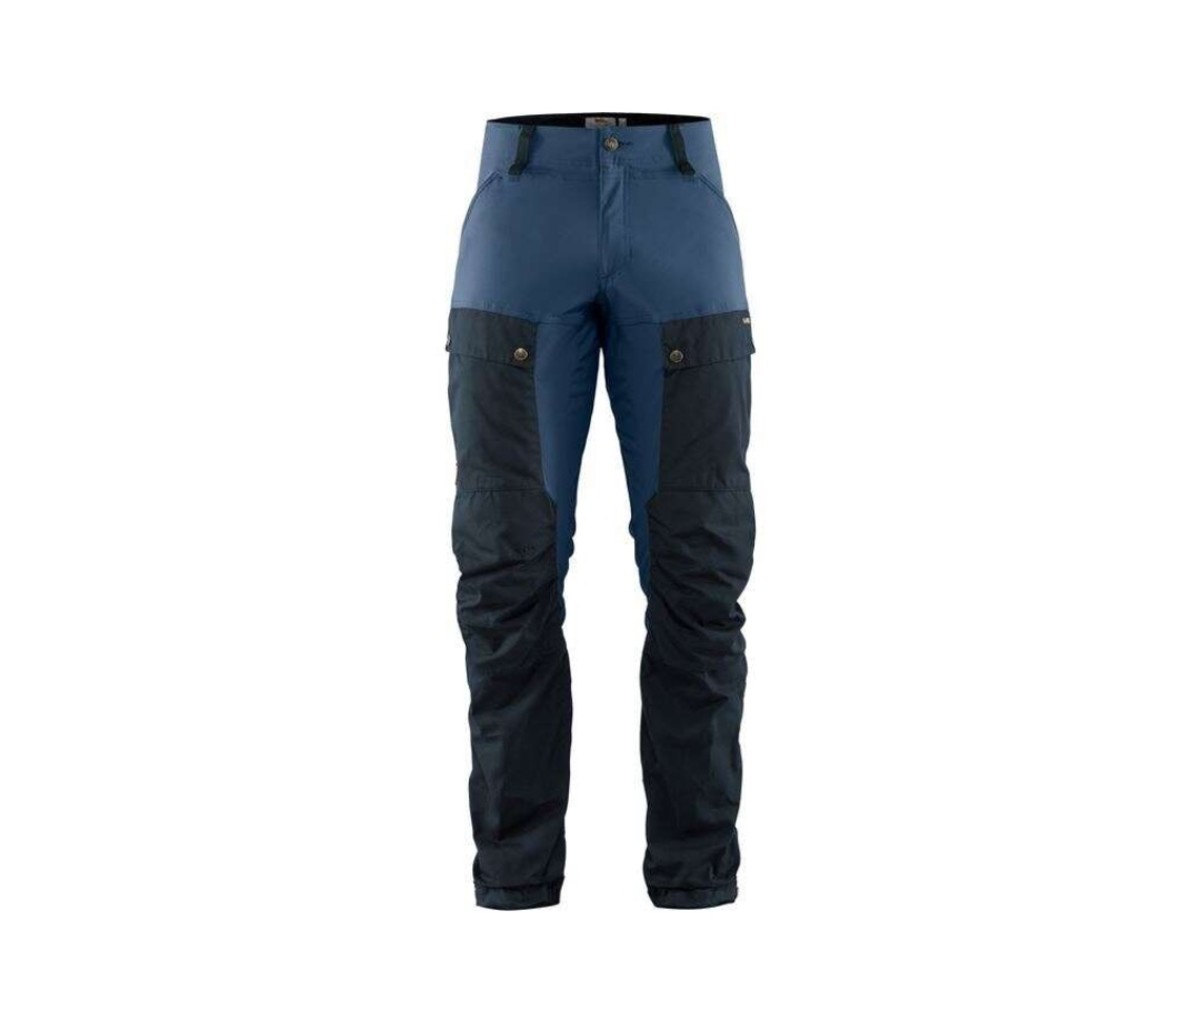 Brush off thorns and twigs in these hybrid Keb pants from Fjallraven while keeping cool.